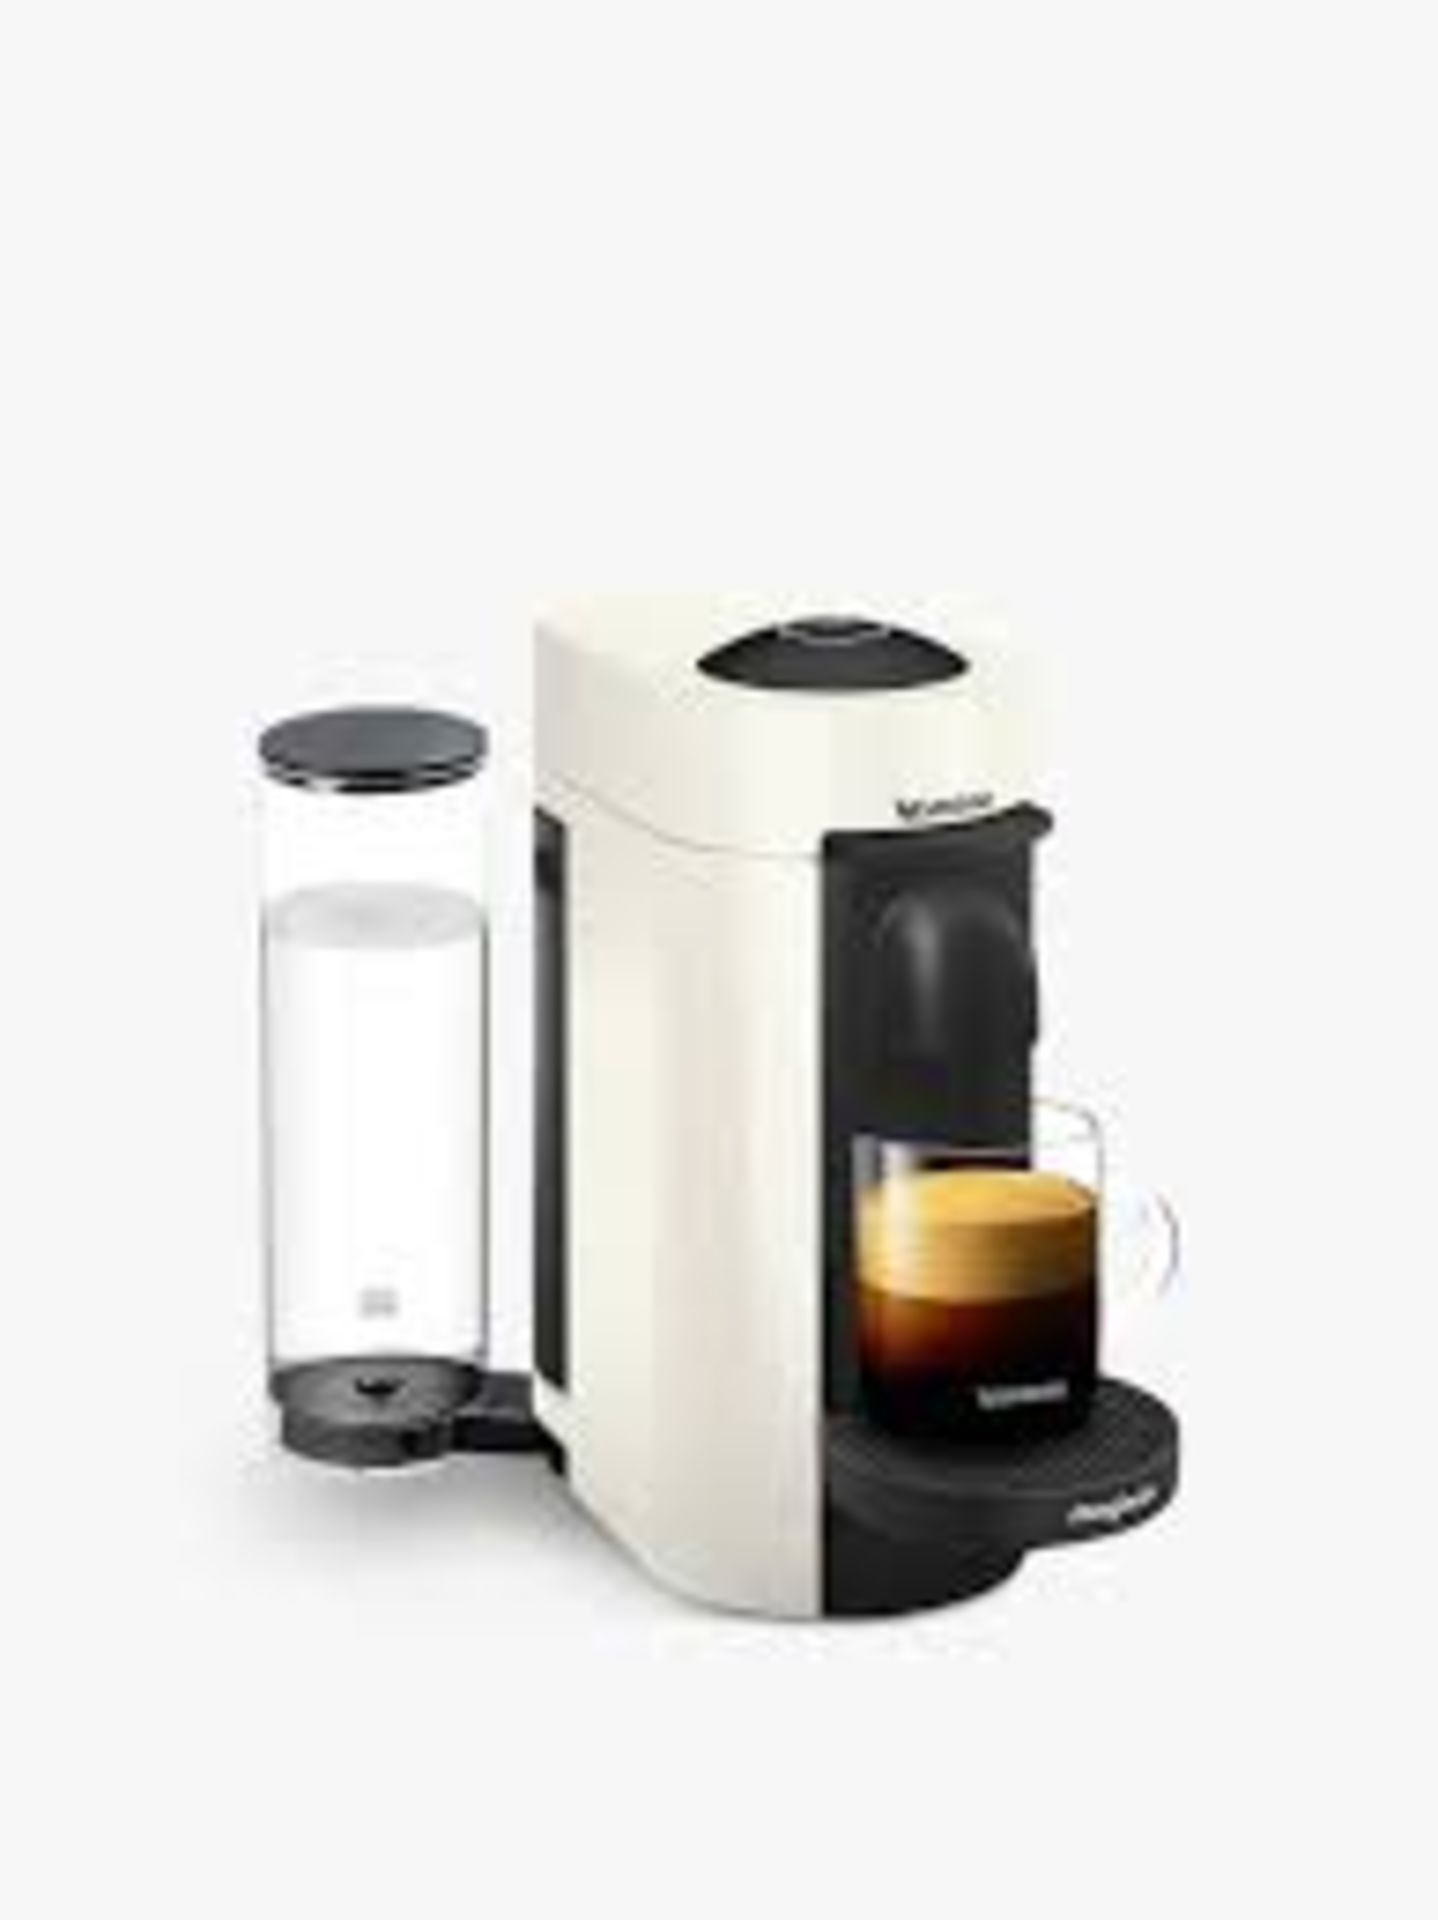 (REF118301) Nespresso Vertuo Plus Limited Edition White Capsule Coffee Machine by Magimix RRP 269.